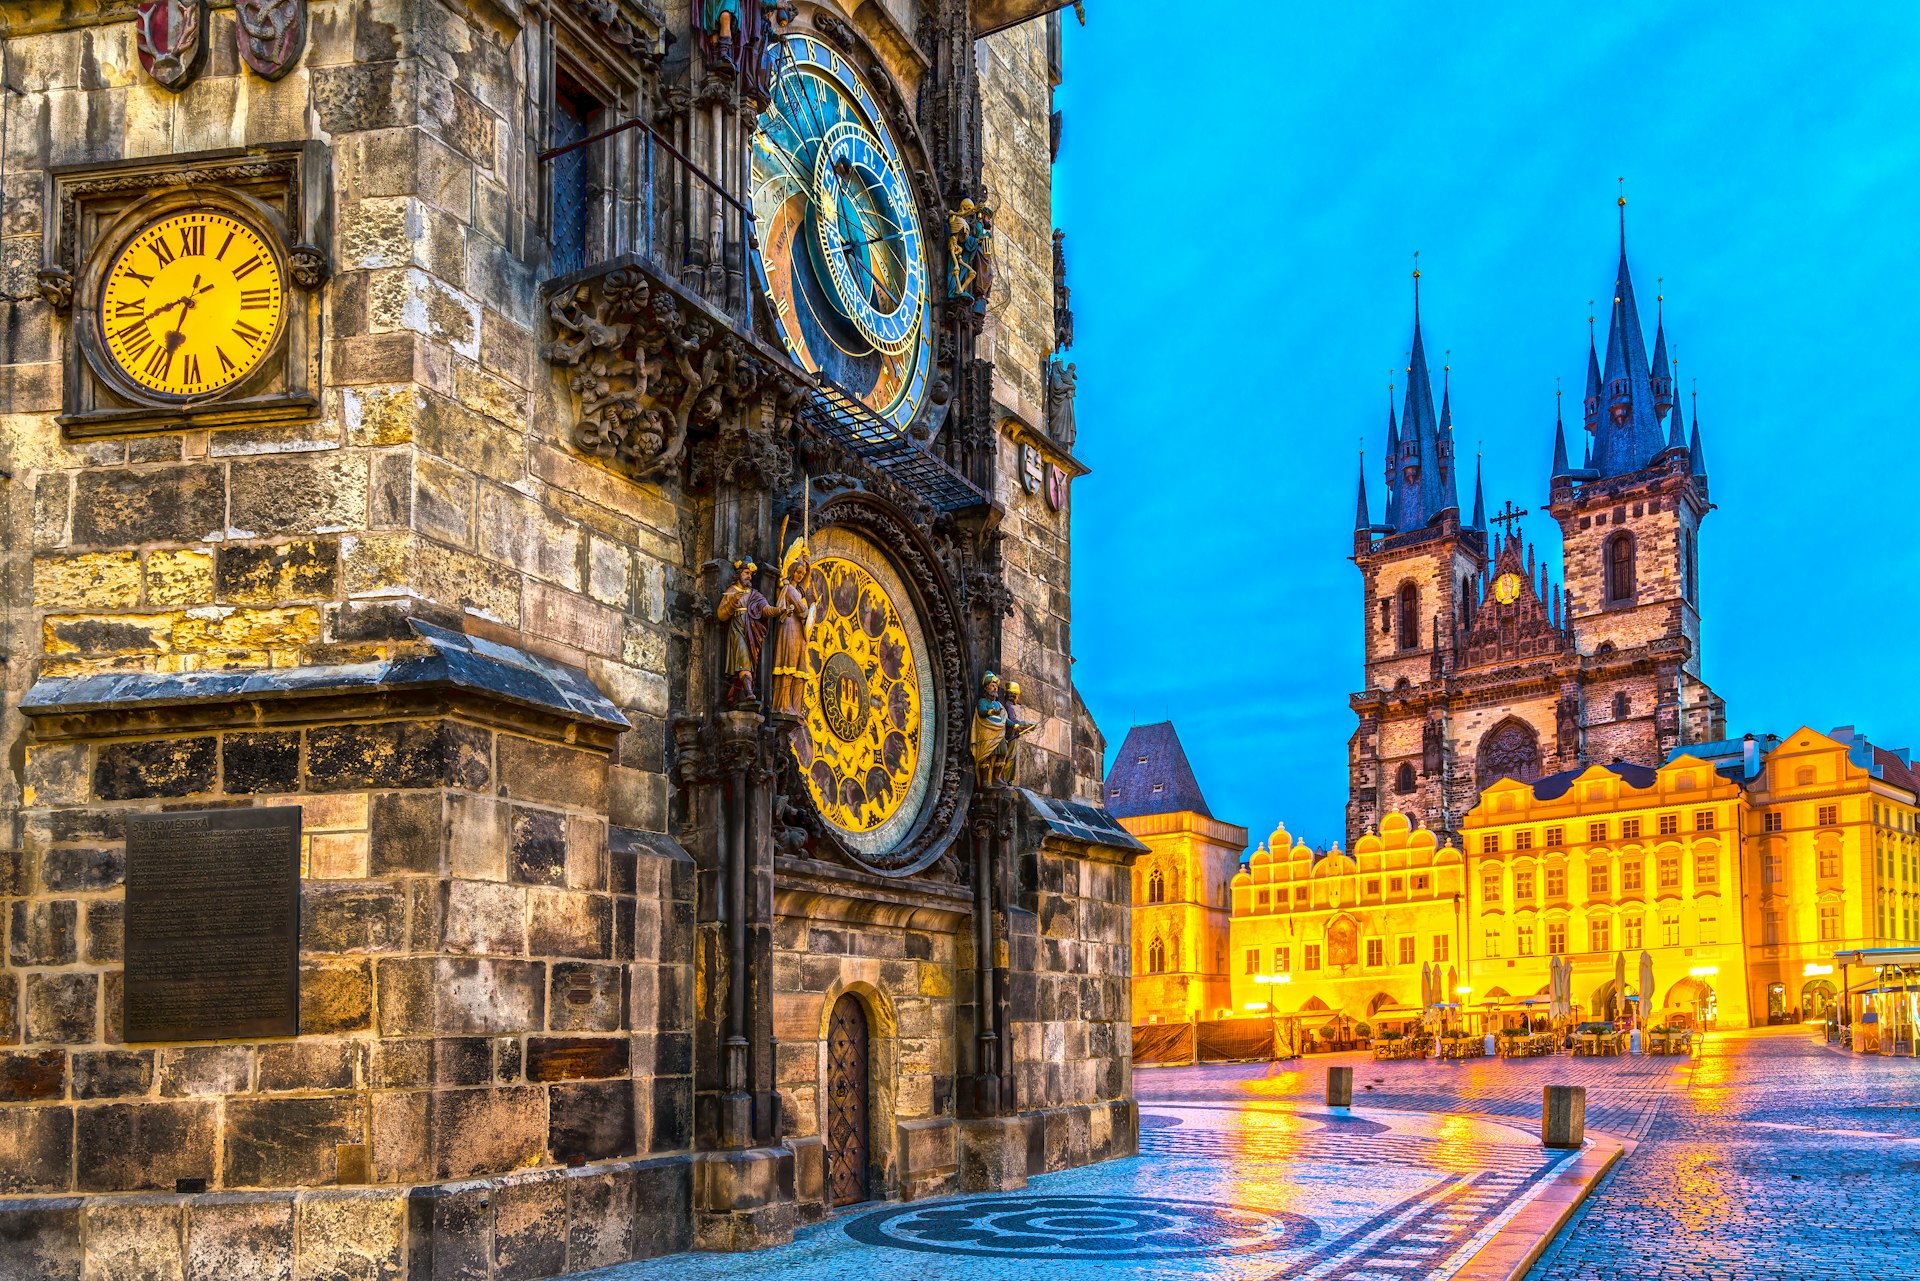 A damp city square in the evening with an ornate astronomical clock in gold and blue